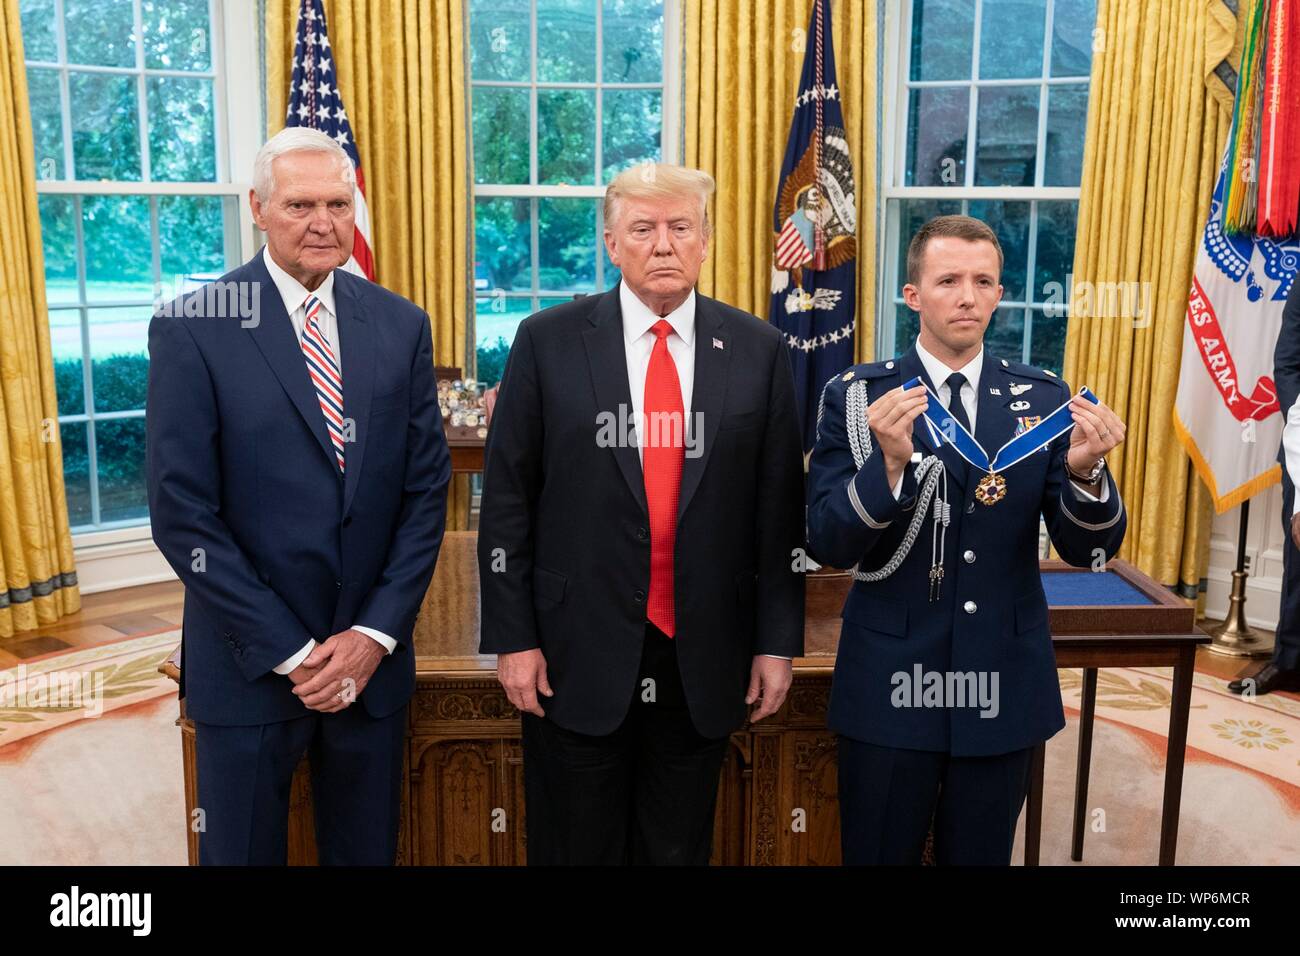 Washington, DC, USA. 05 September, 2019. U.S President Donald Trump, center, awards the Presidential Medal of Freedom, to Hall of Fame Los Angeles Lakers basketball star and legendary NBA General Manager Jerry West during a ceremony in the Oval Office of the White House September 5, 2019 in Washington, DC. Stock Photo